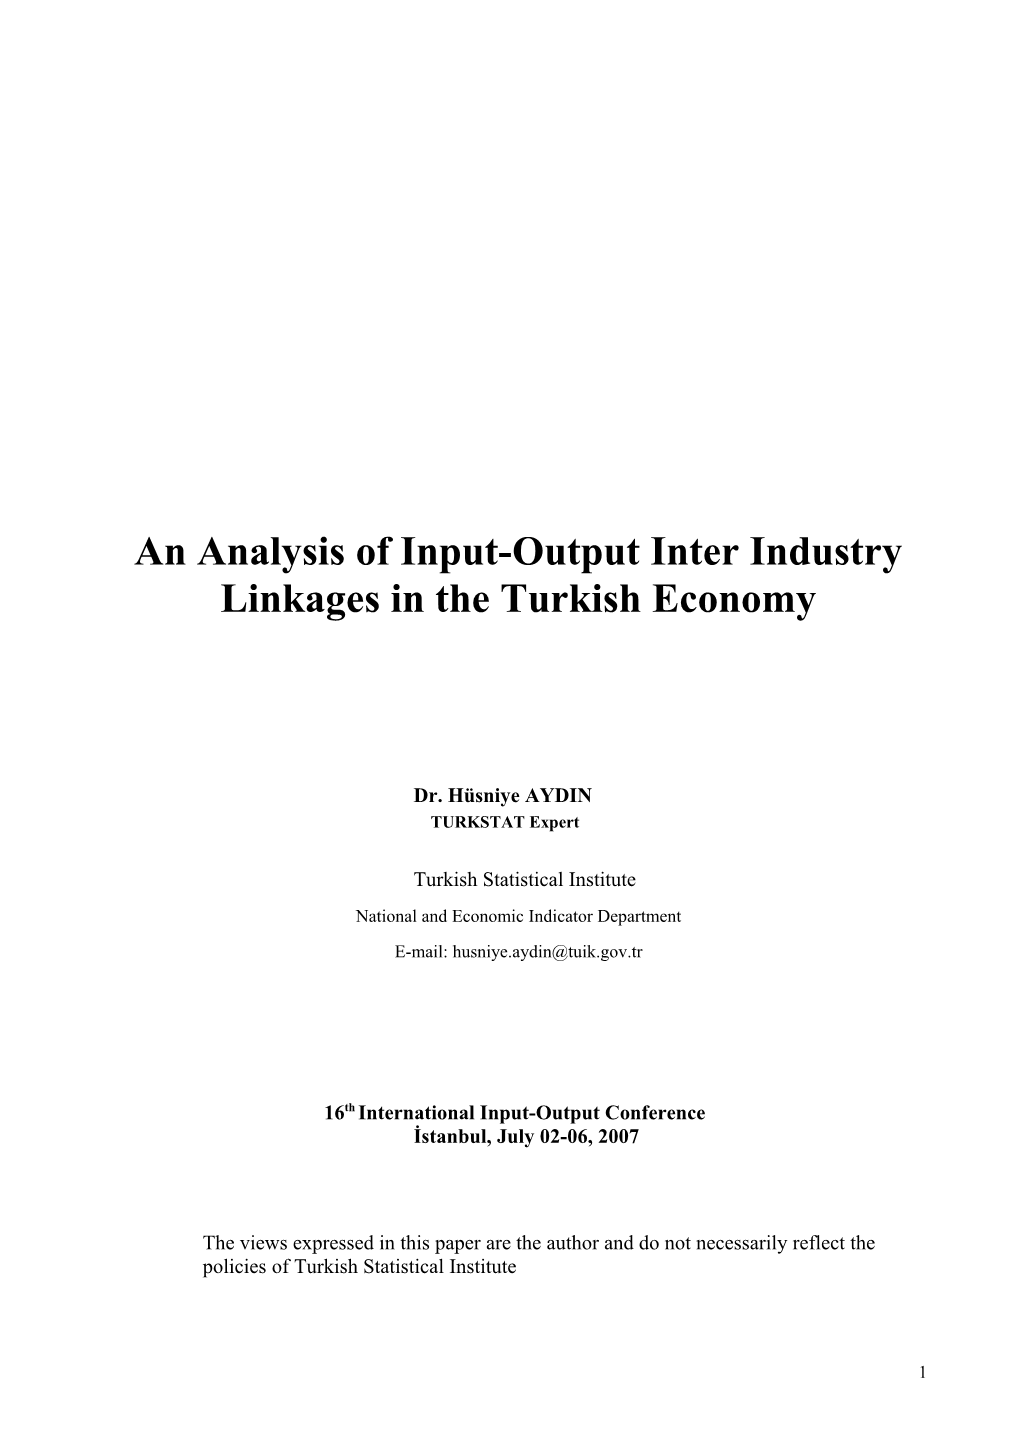 An Analysis of Input-Output Inter Industry Linkages in the Turkish Economy